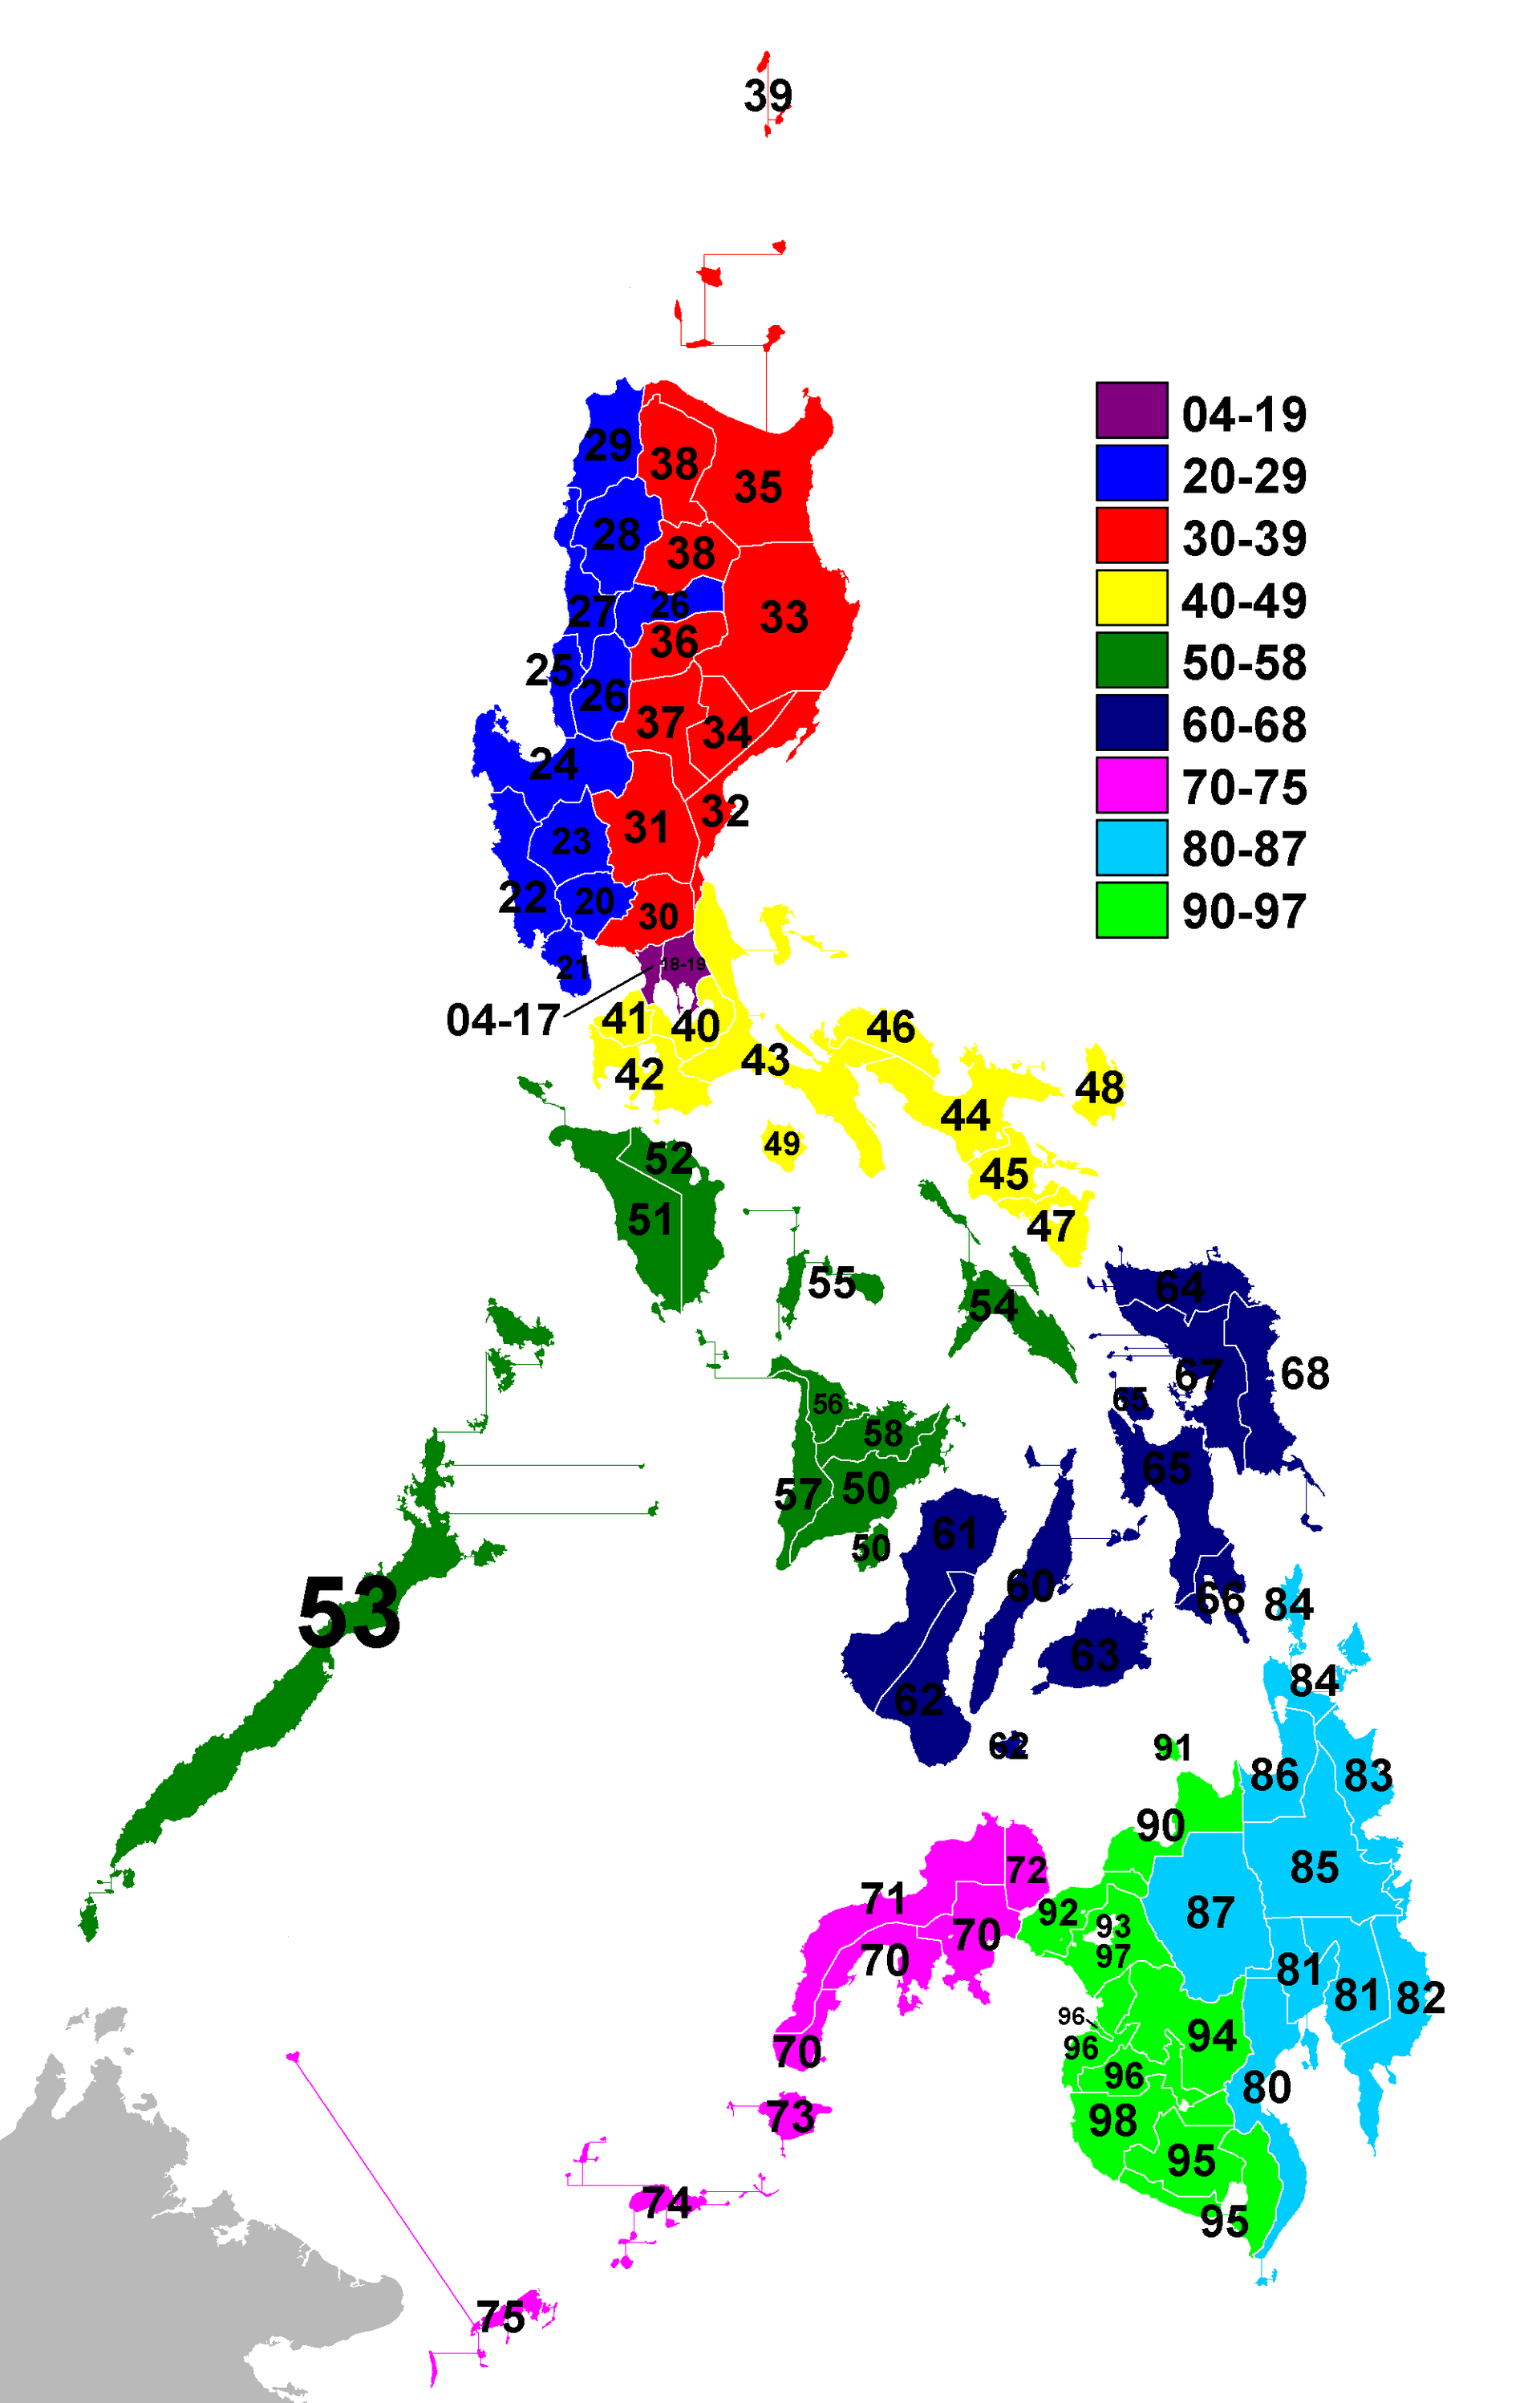 List of ZIP codes in the Philippines - Wikipedia